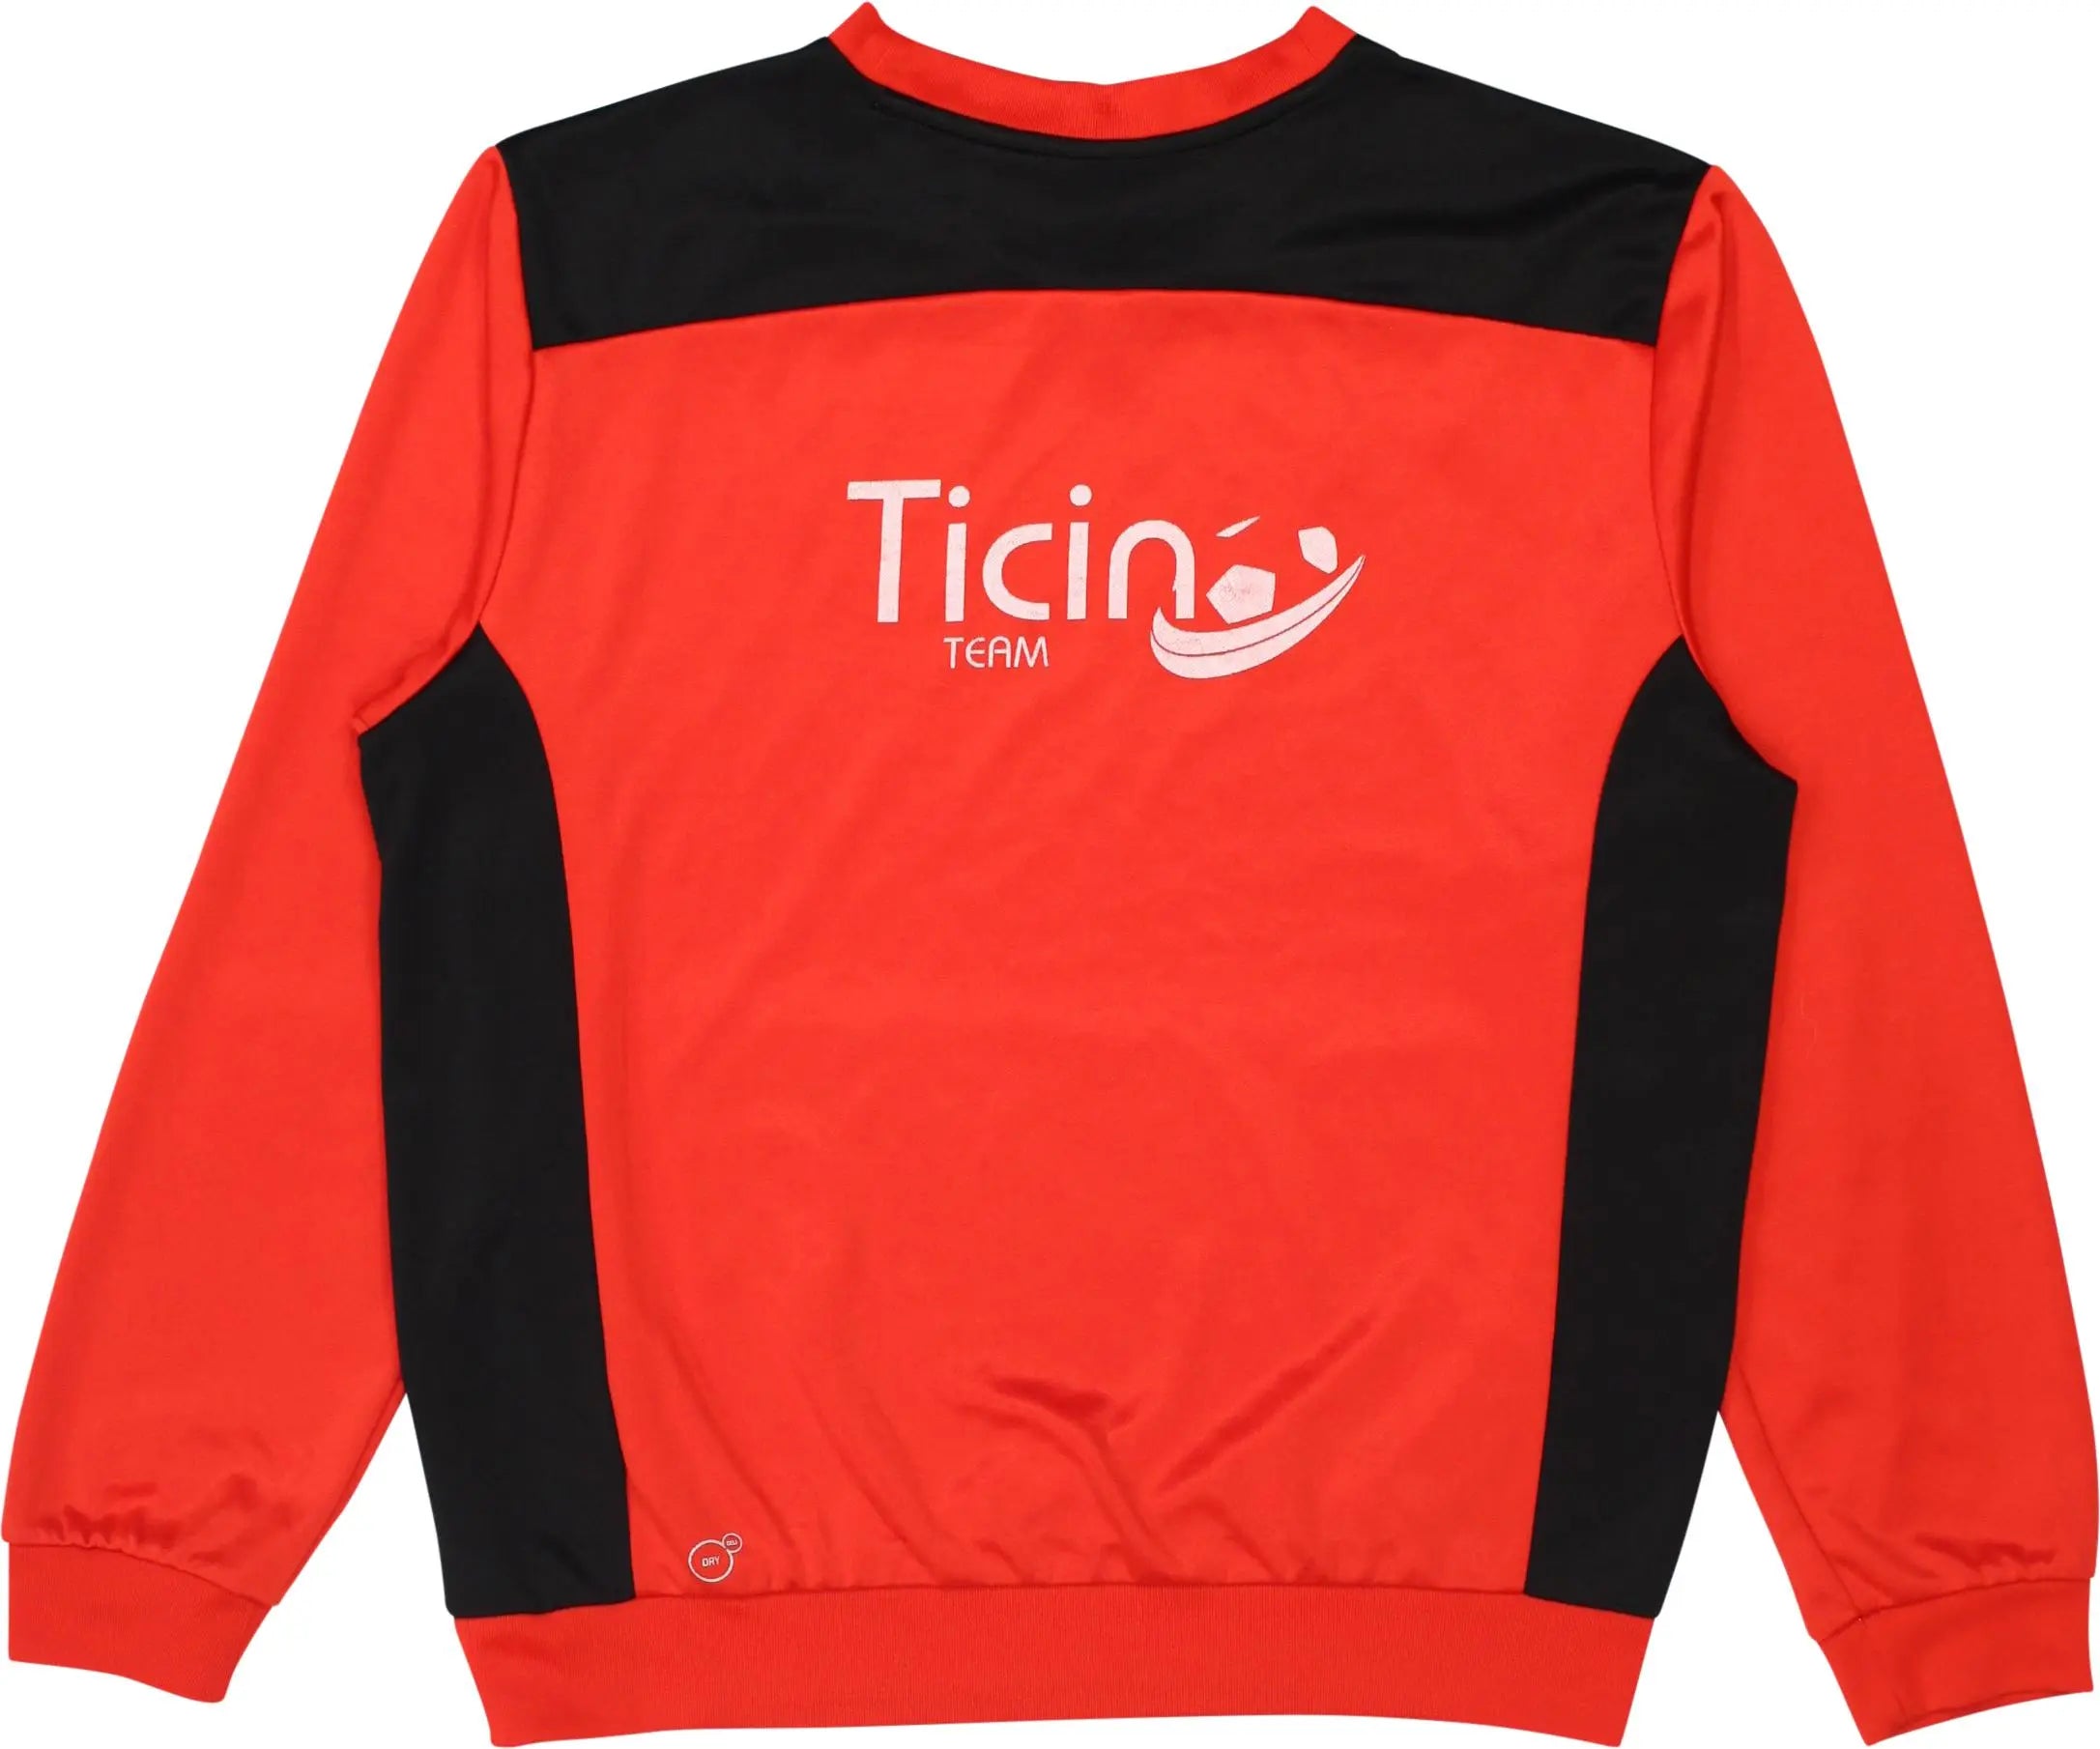 Puma - Long Sleeve '204 Ticin Team' by Puma- ThriftTale.com - Vintage and second handclothing